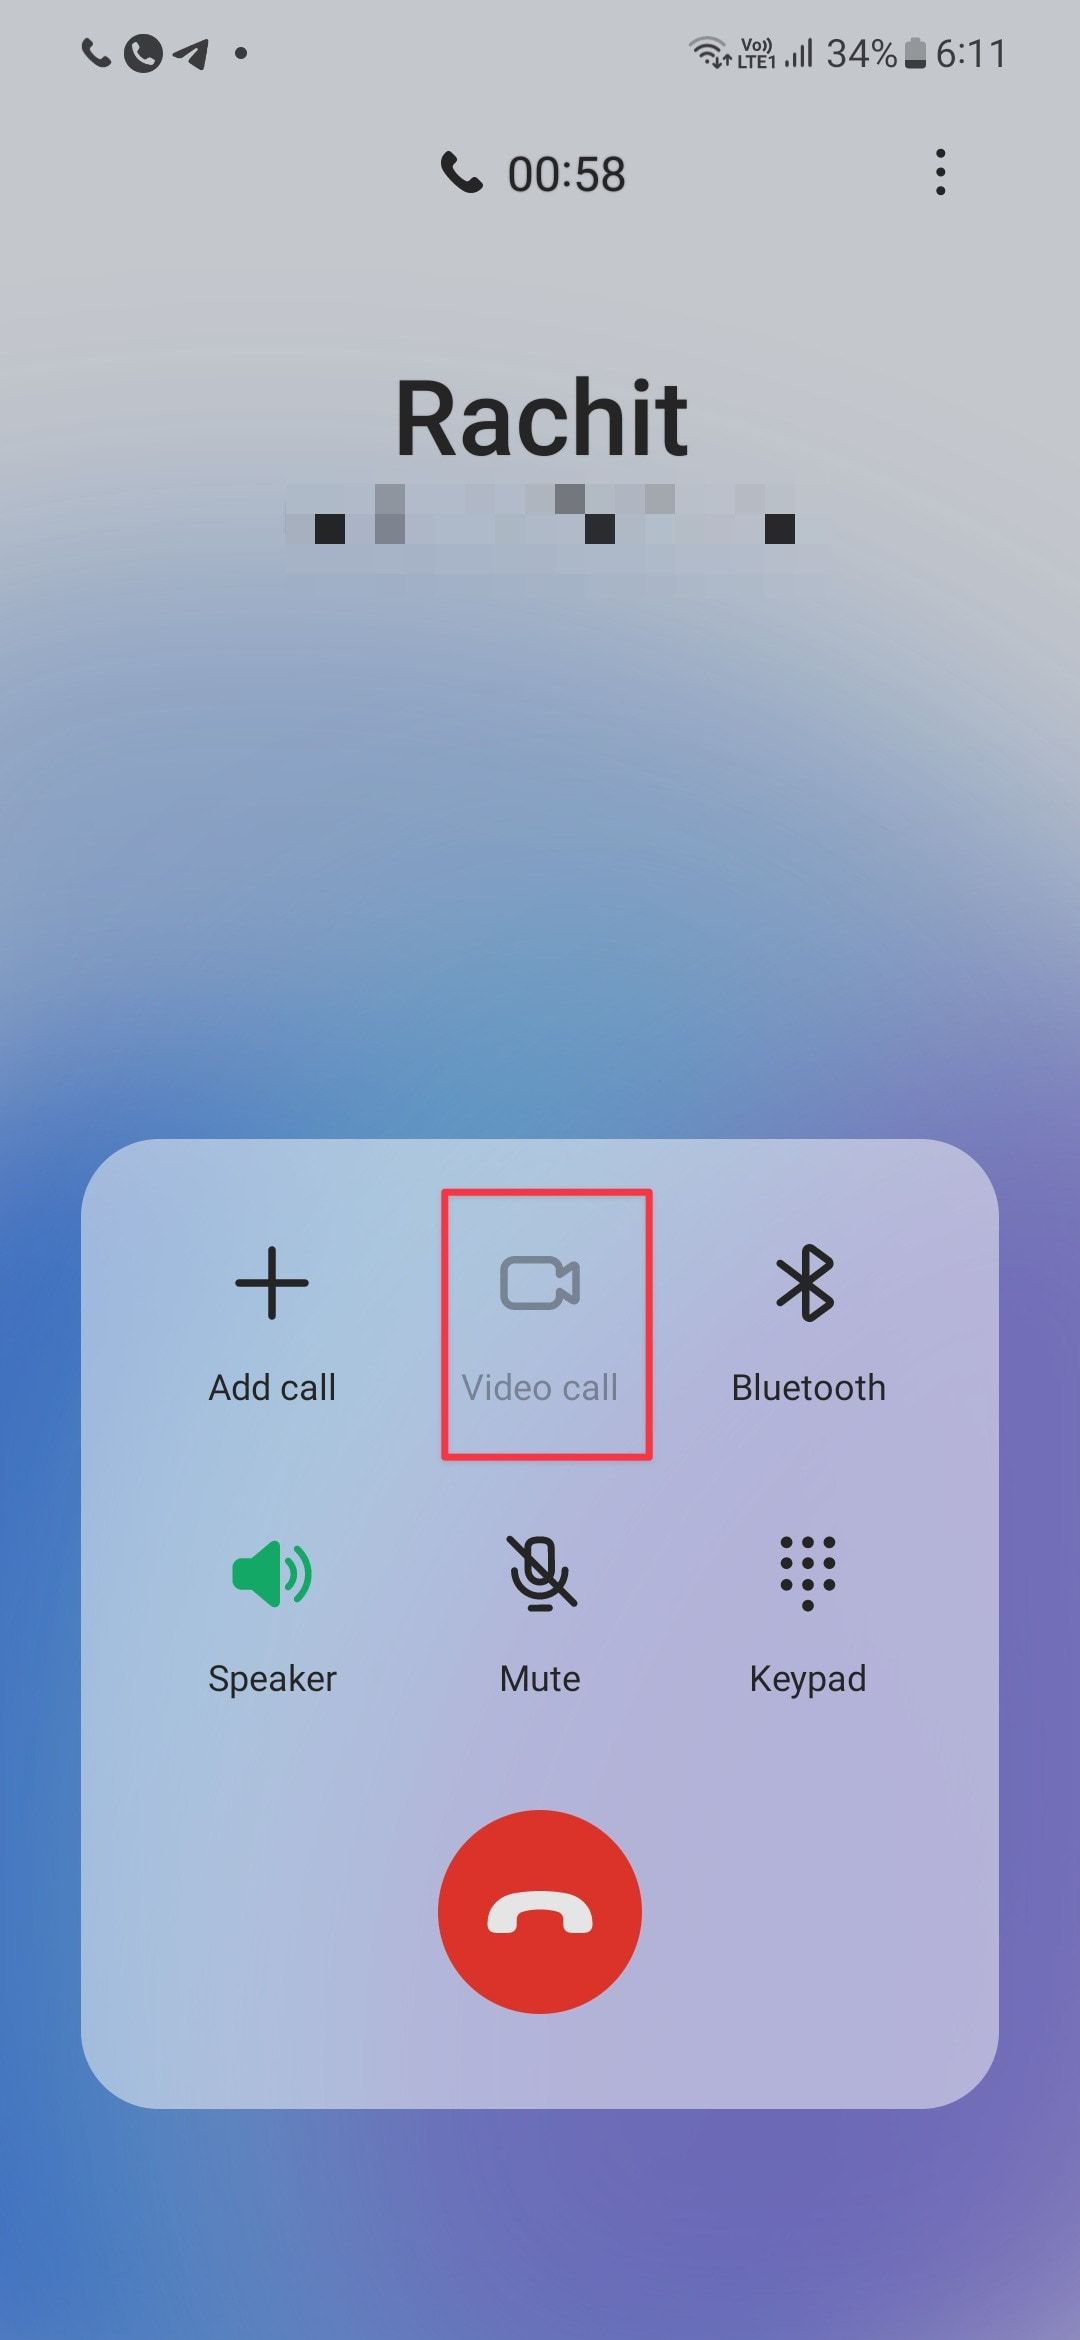 Samsung Call page screenshot showing video call button